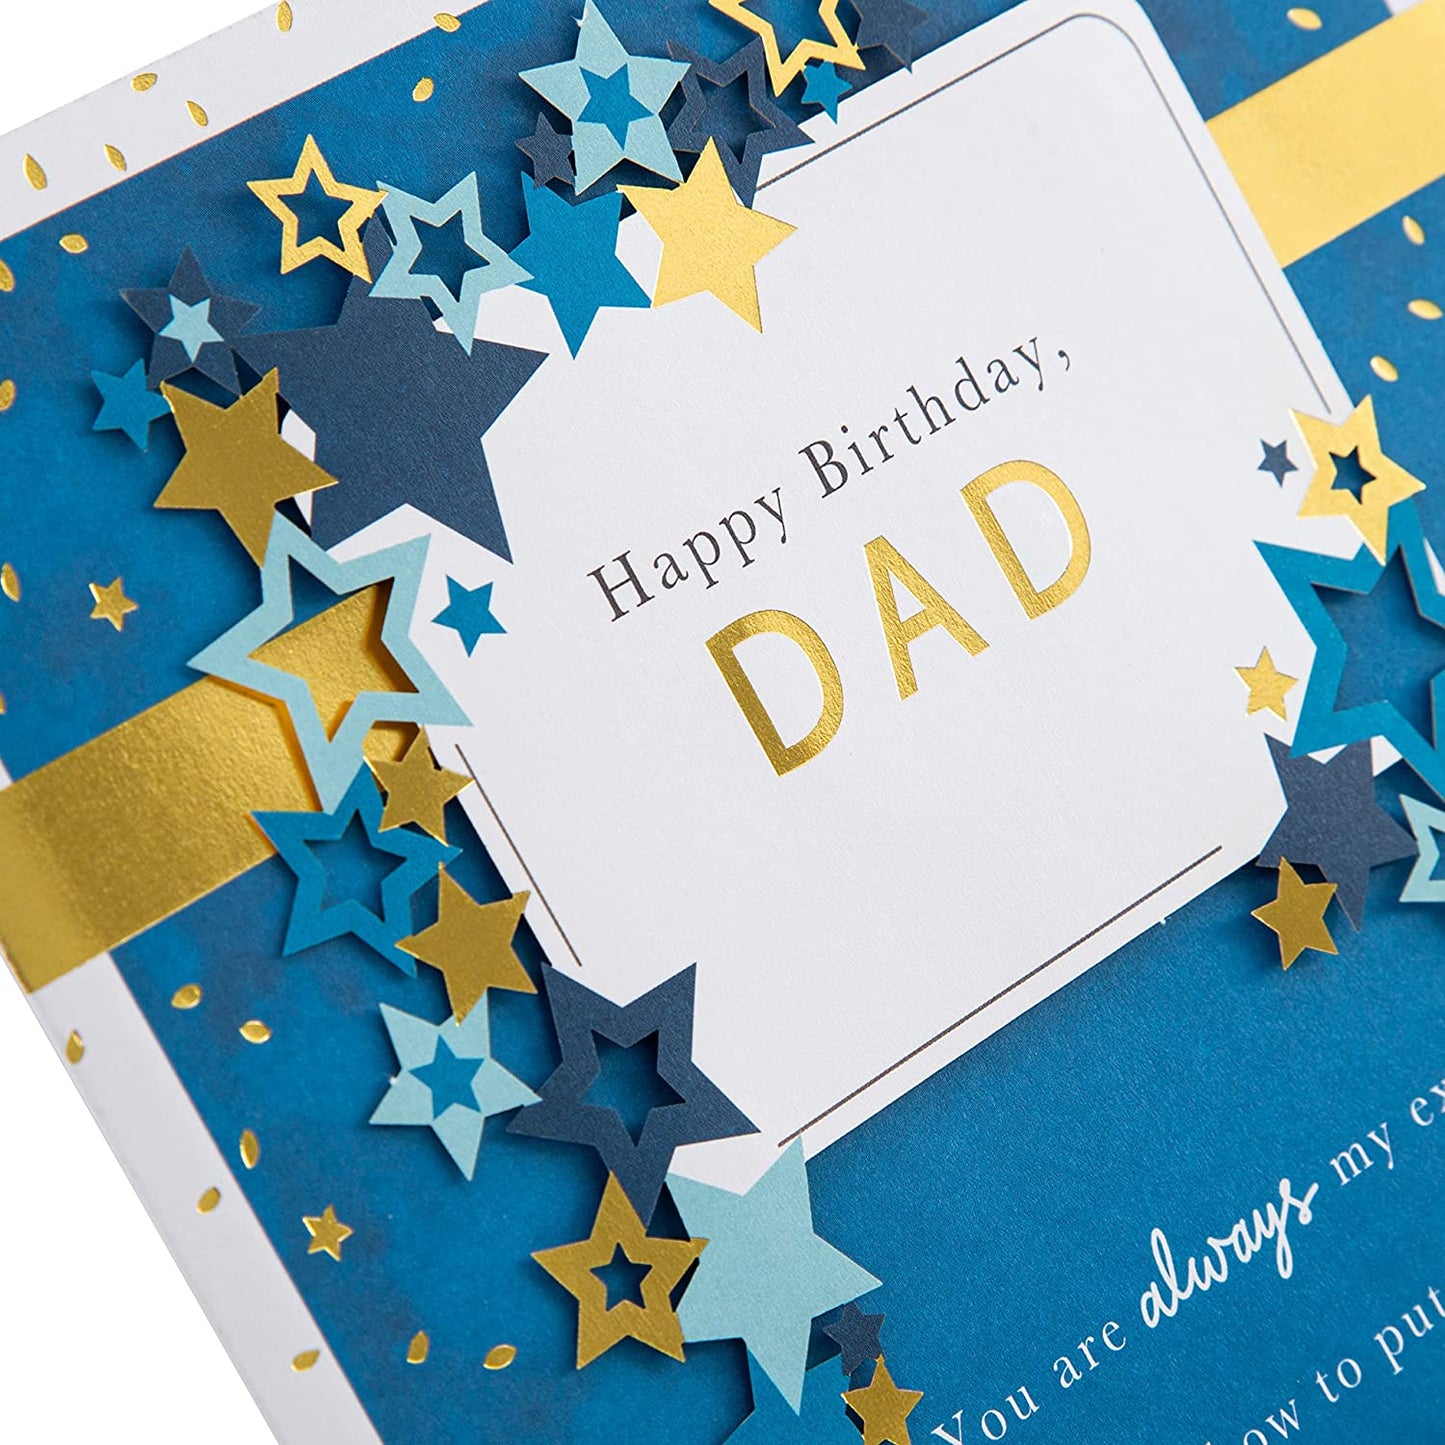 Classic Verse Design Large Birthday Card for Dad